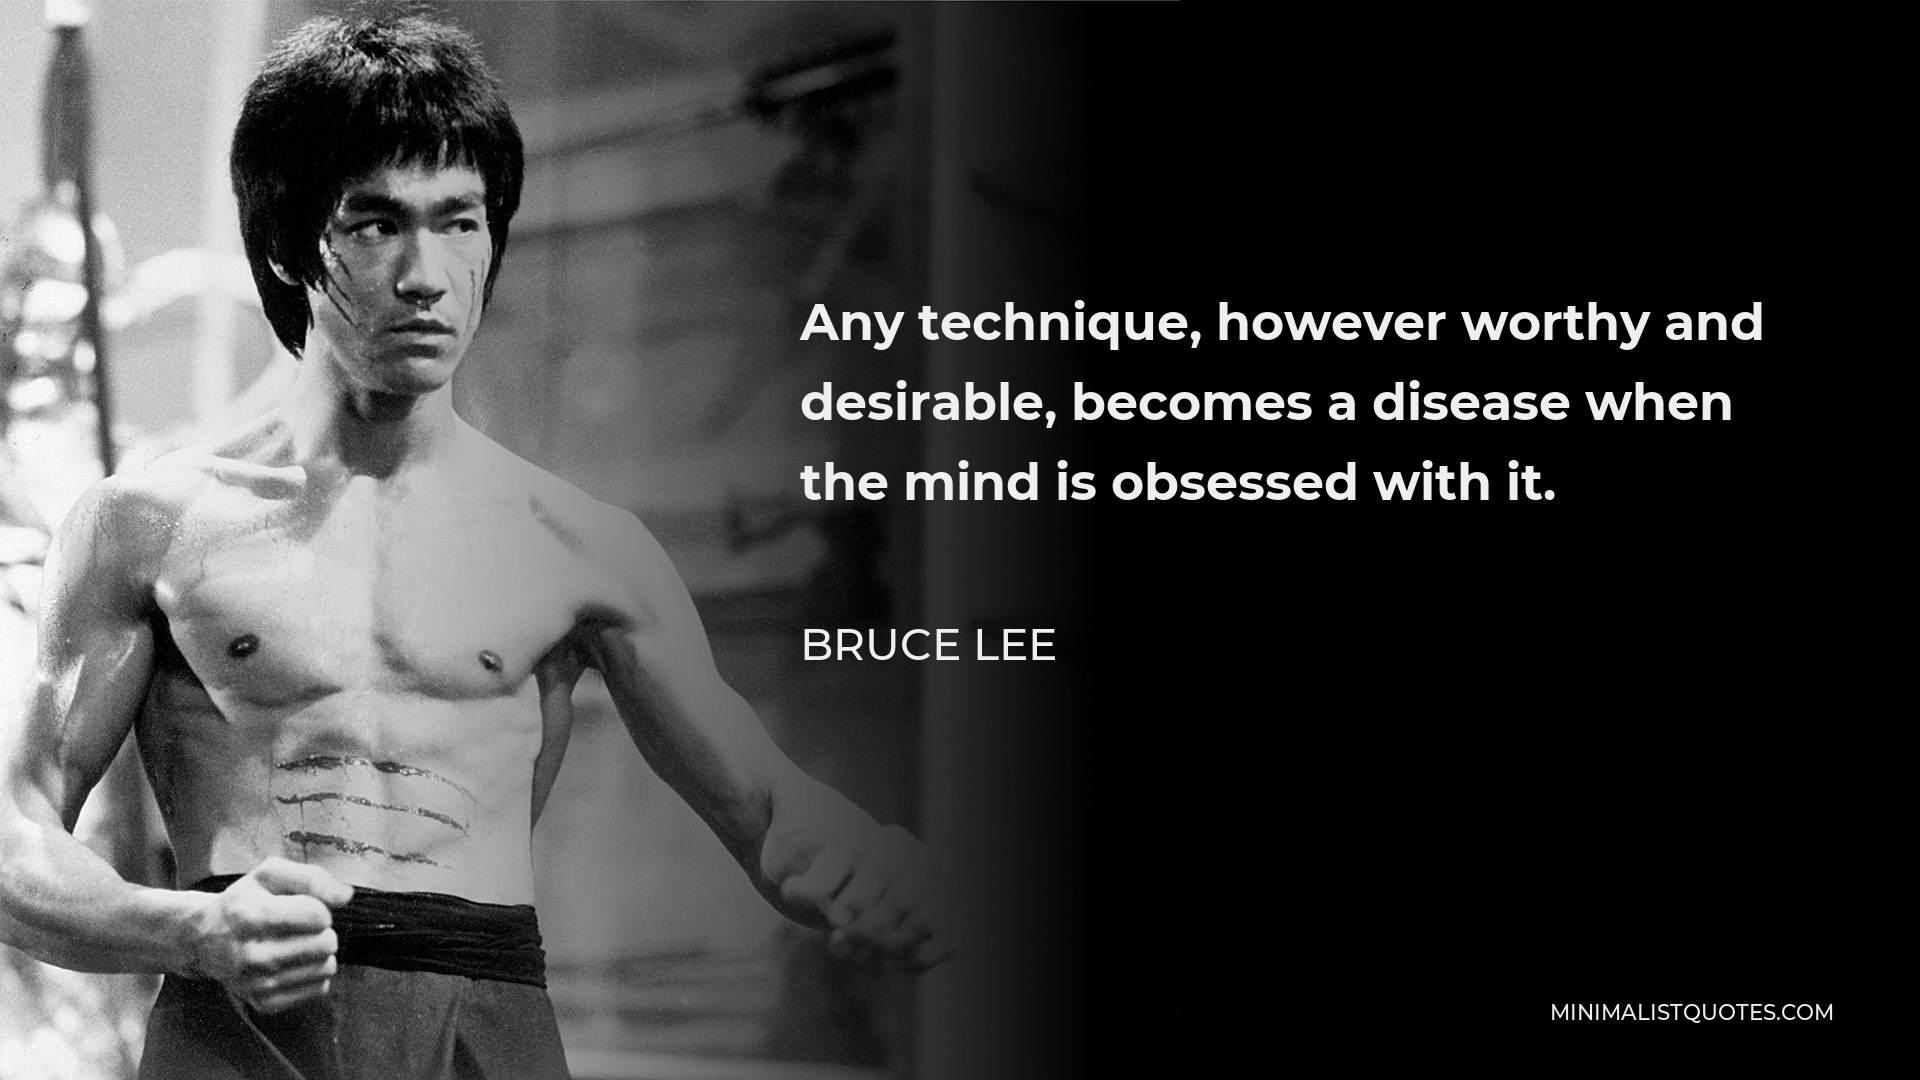 Bruce Lee Quote - Any technique, however worthy and desirable, becomes a disease when the mind is obsessed with it.